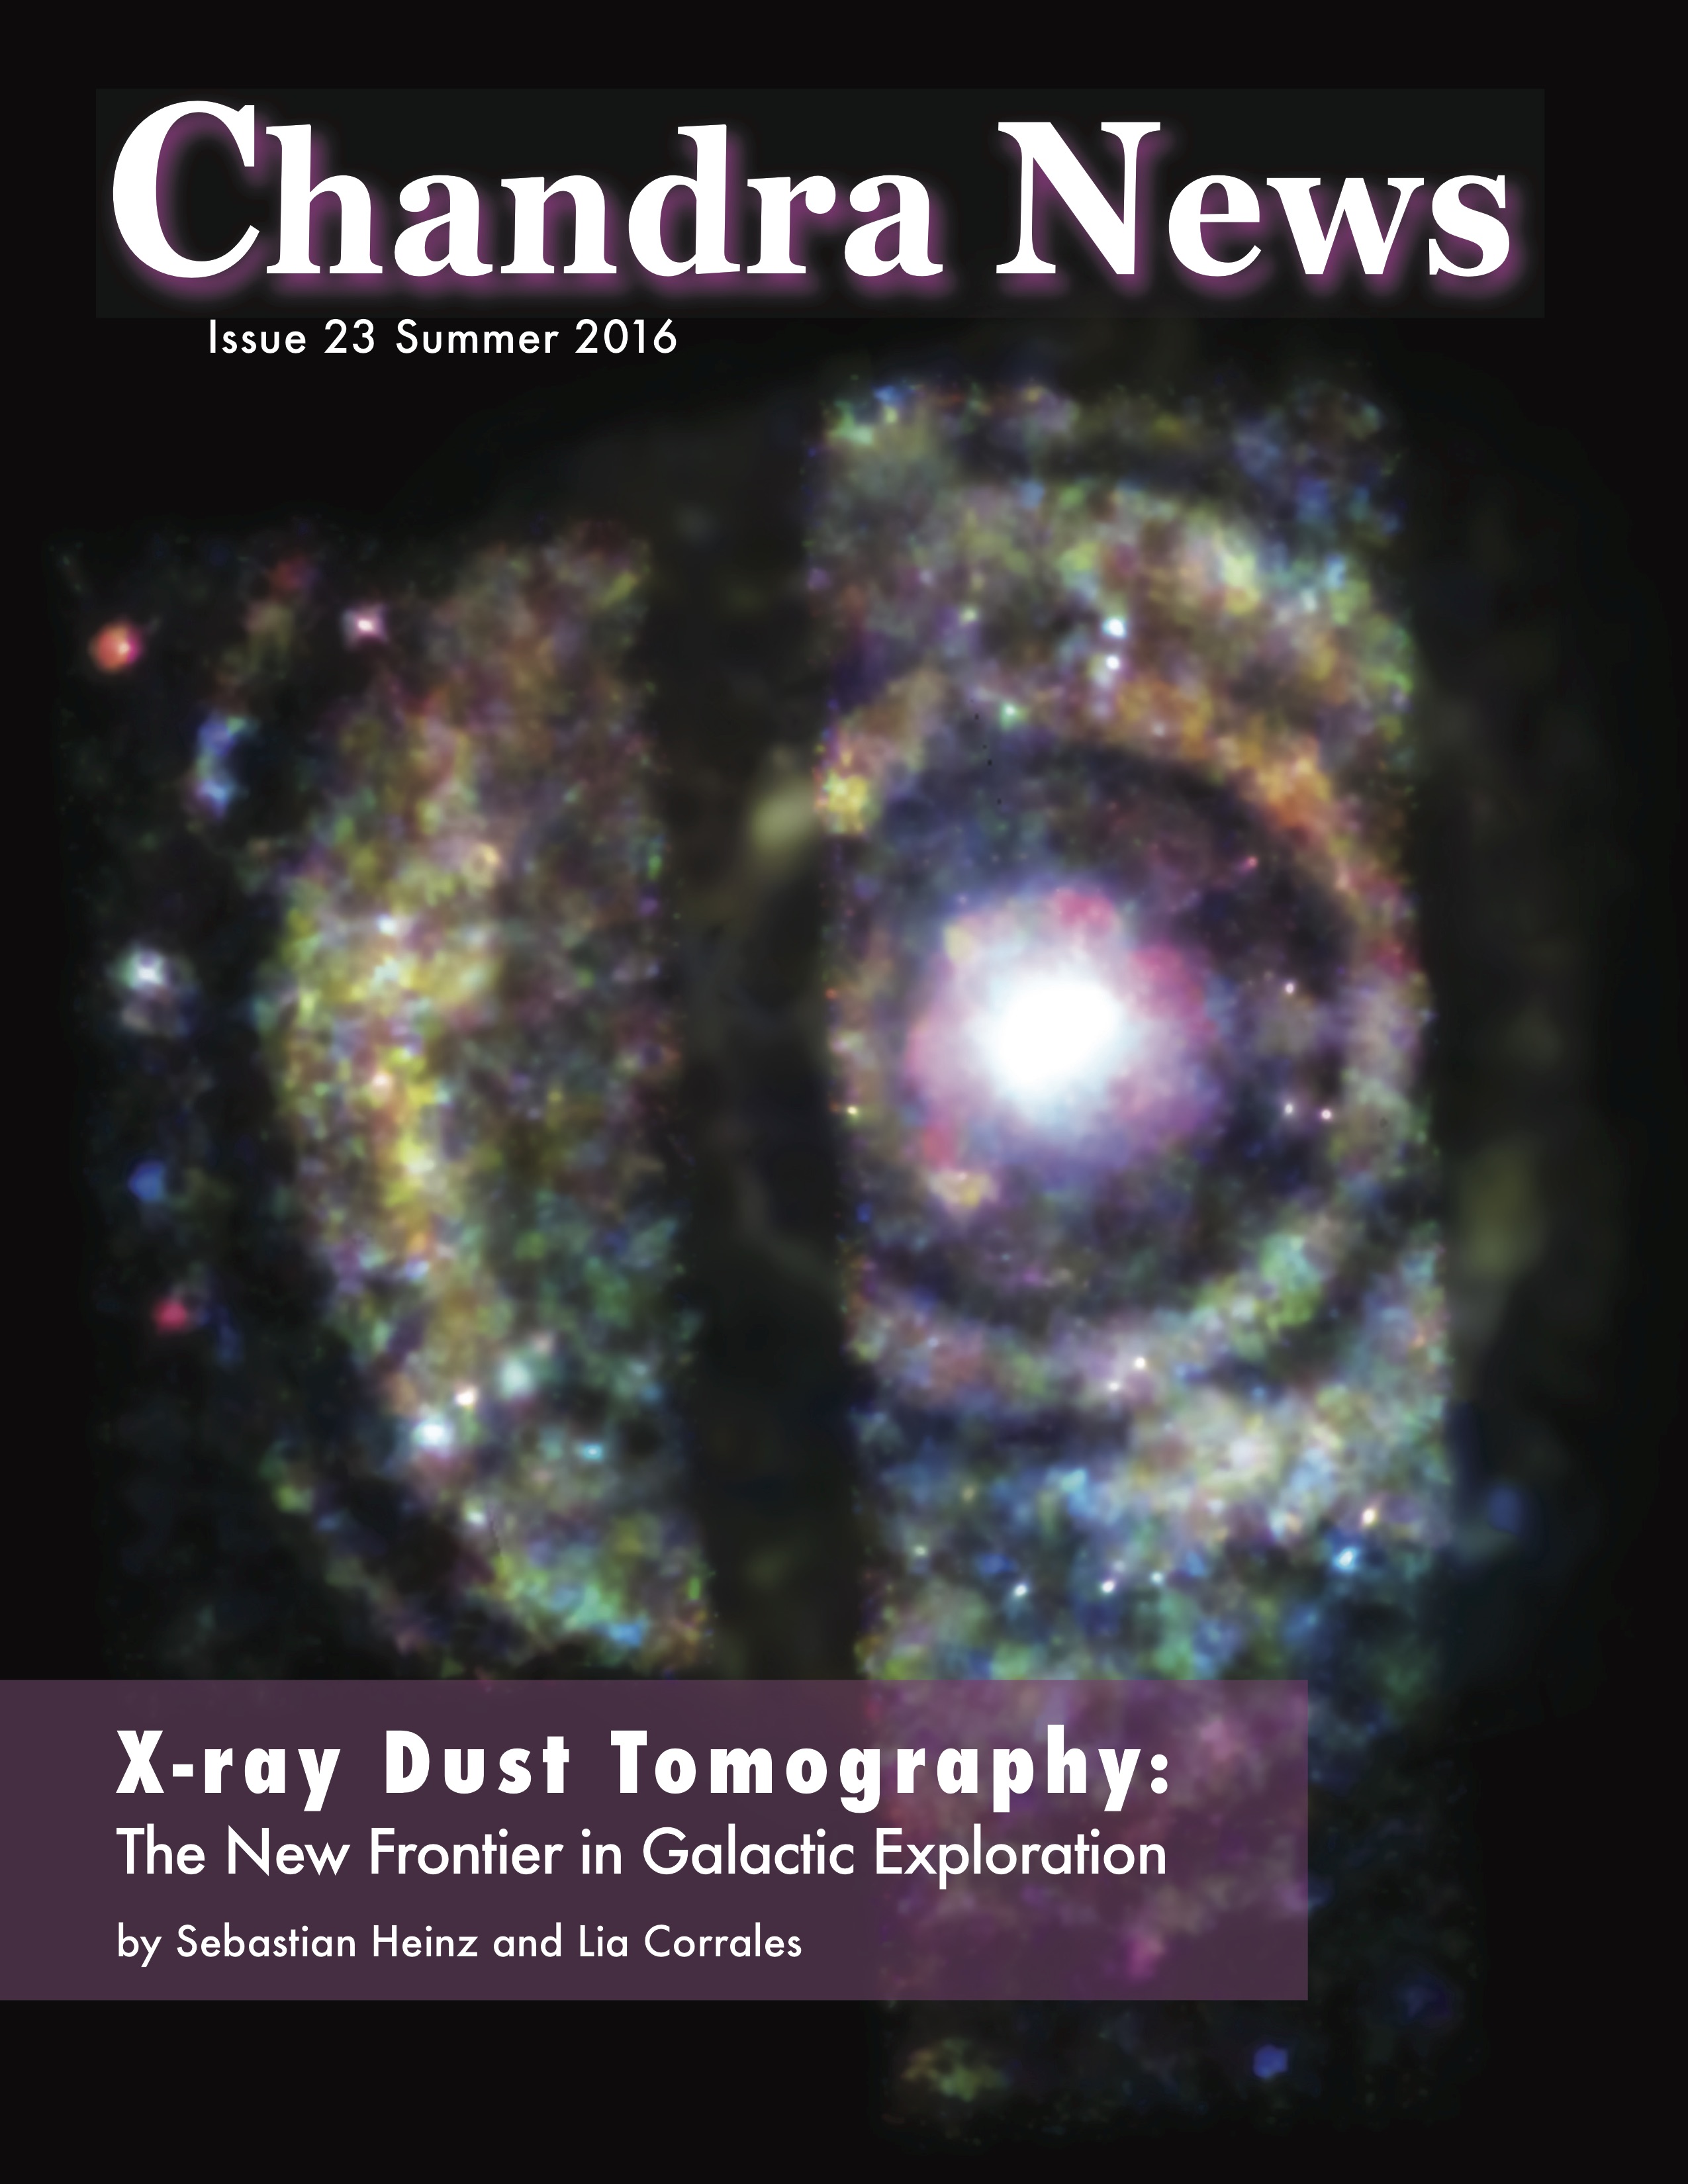 Cover of the Chandra Newsletter, Issue 23.